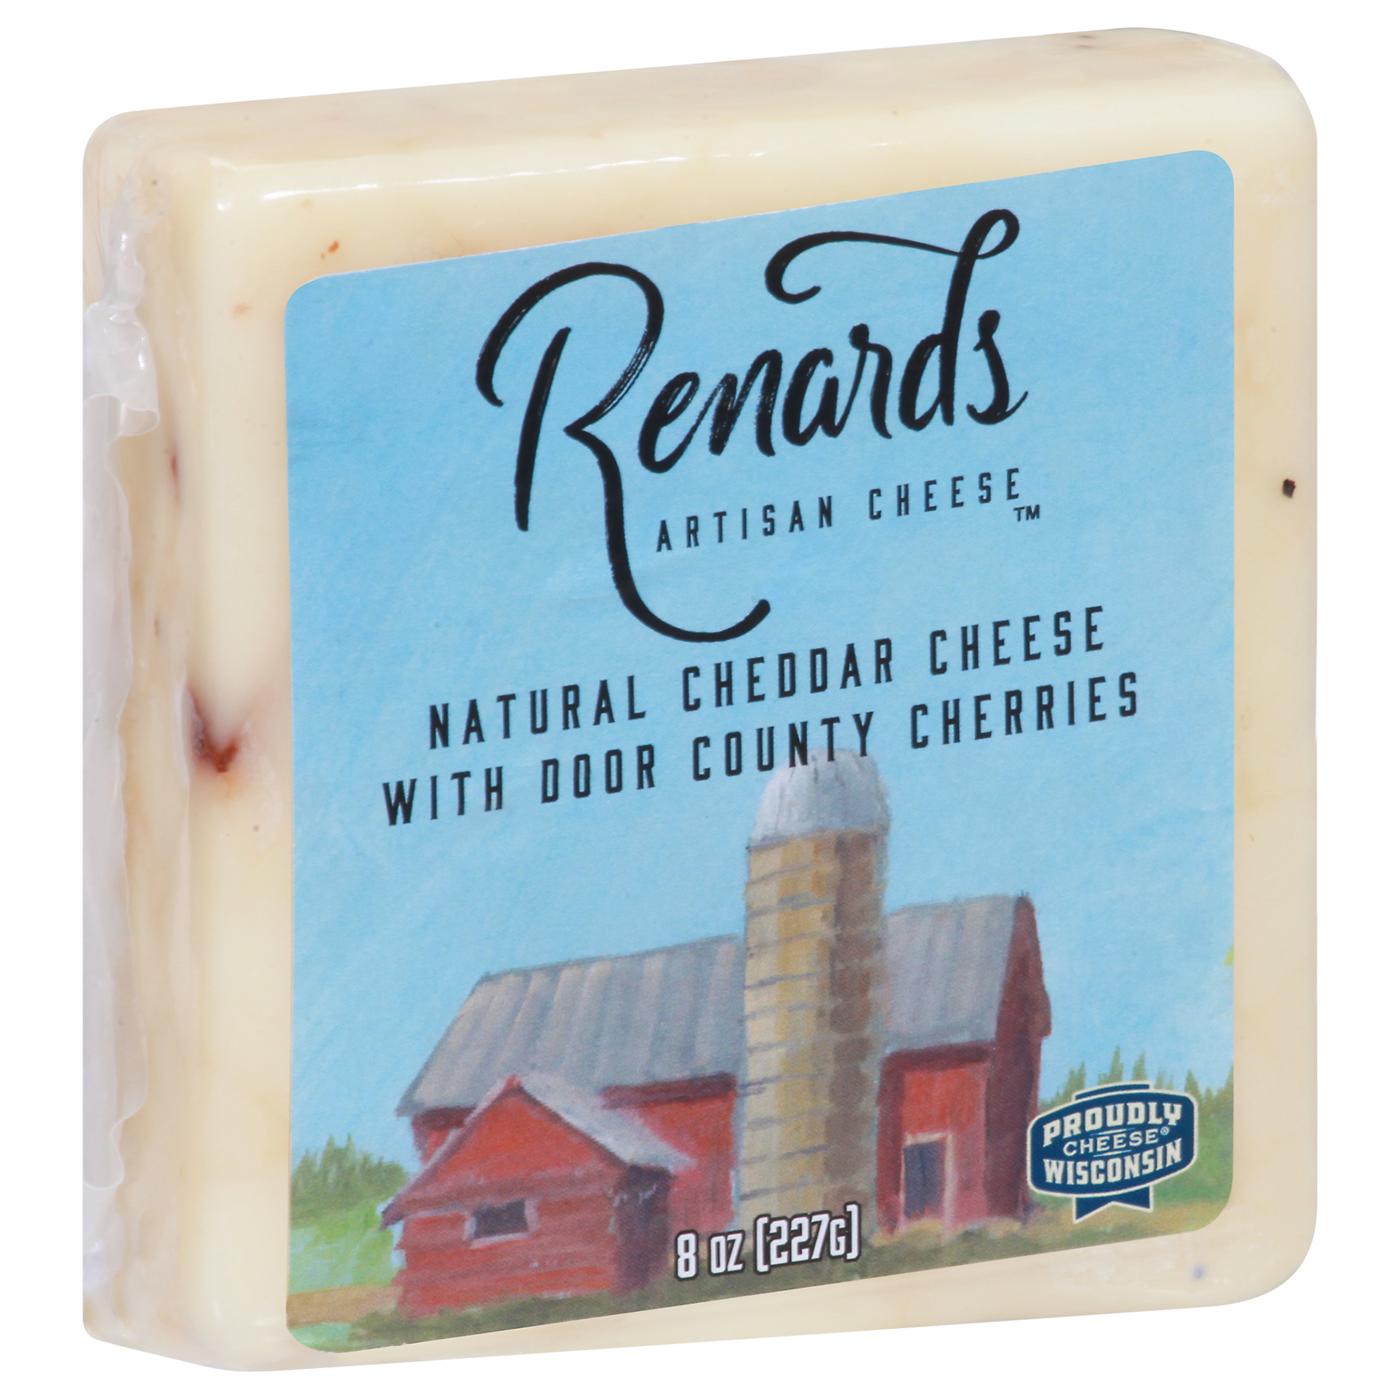 Renard's Artisan Cheese Natural Cheddar Cheese with Door County Cherries; image 3 of 3